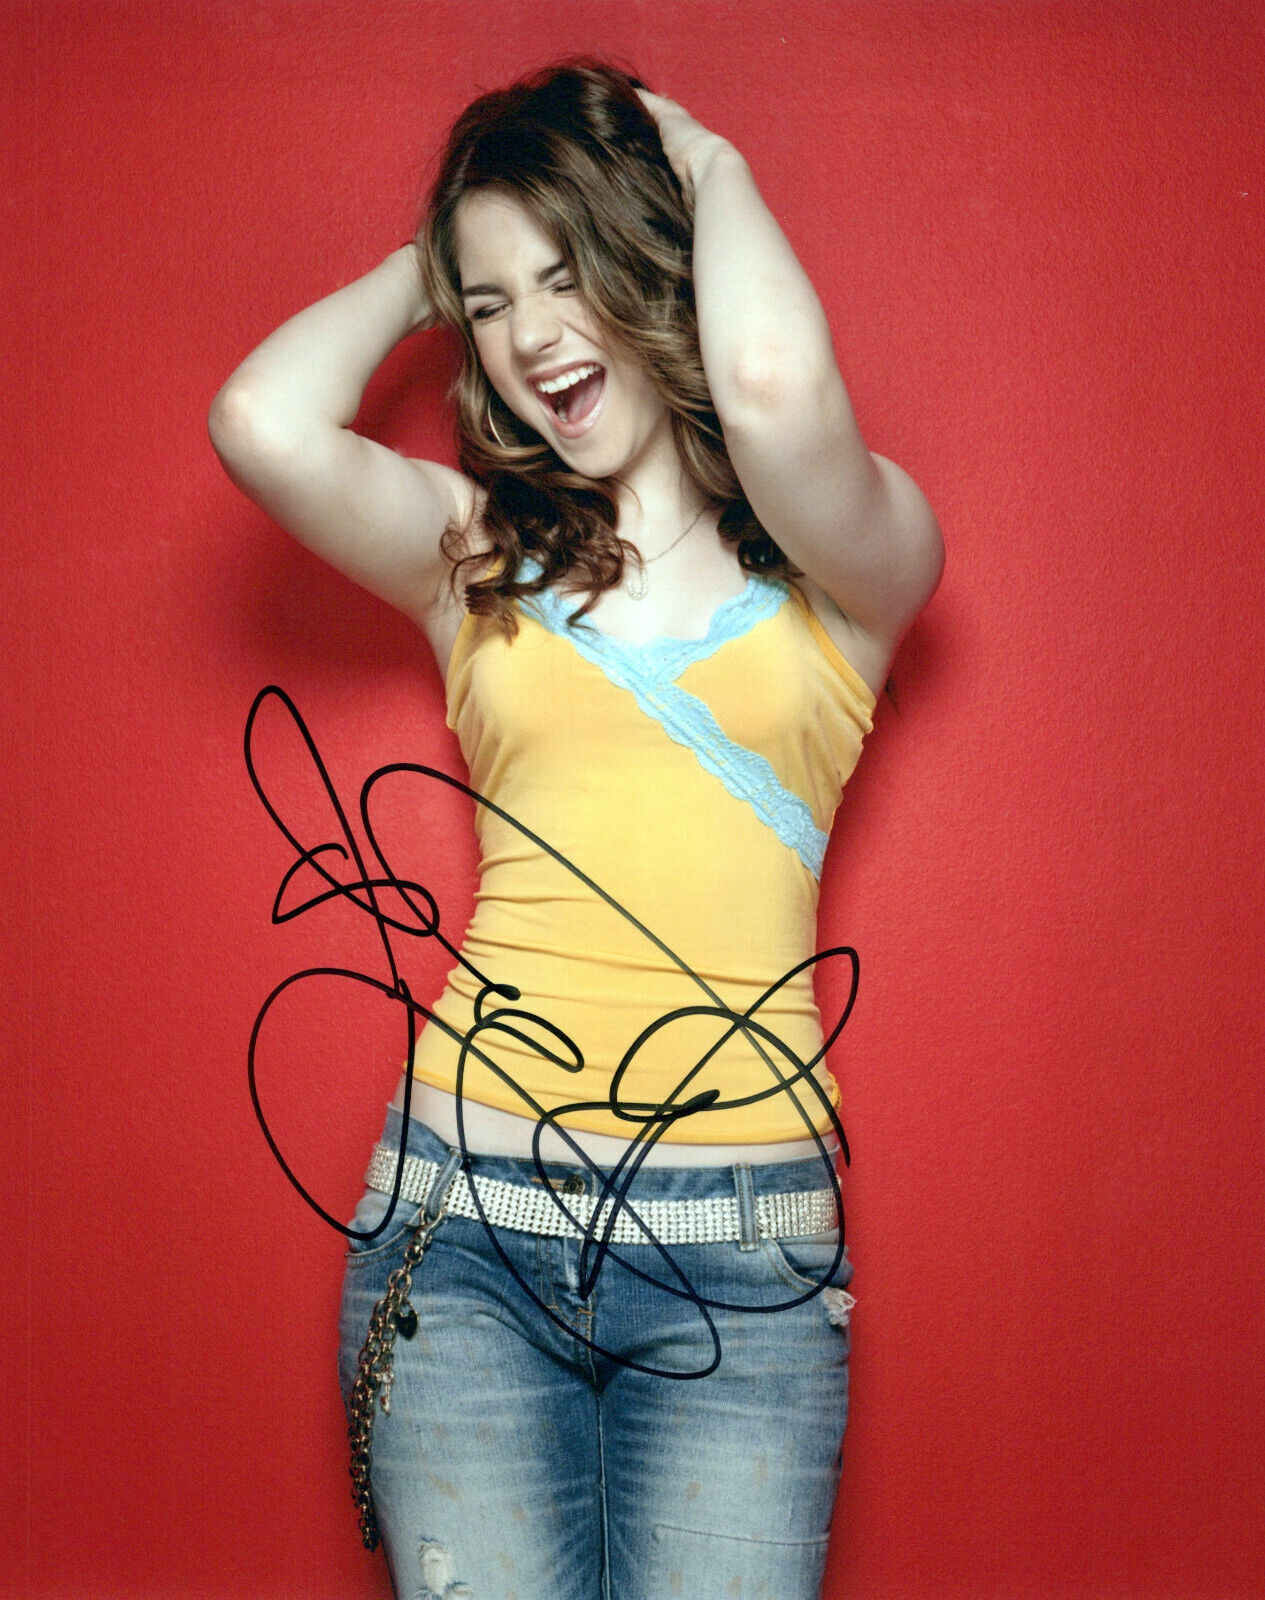 JoJo Levesque glamour shot autographed Photo Poster painting signed 8X10 #9